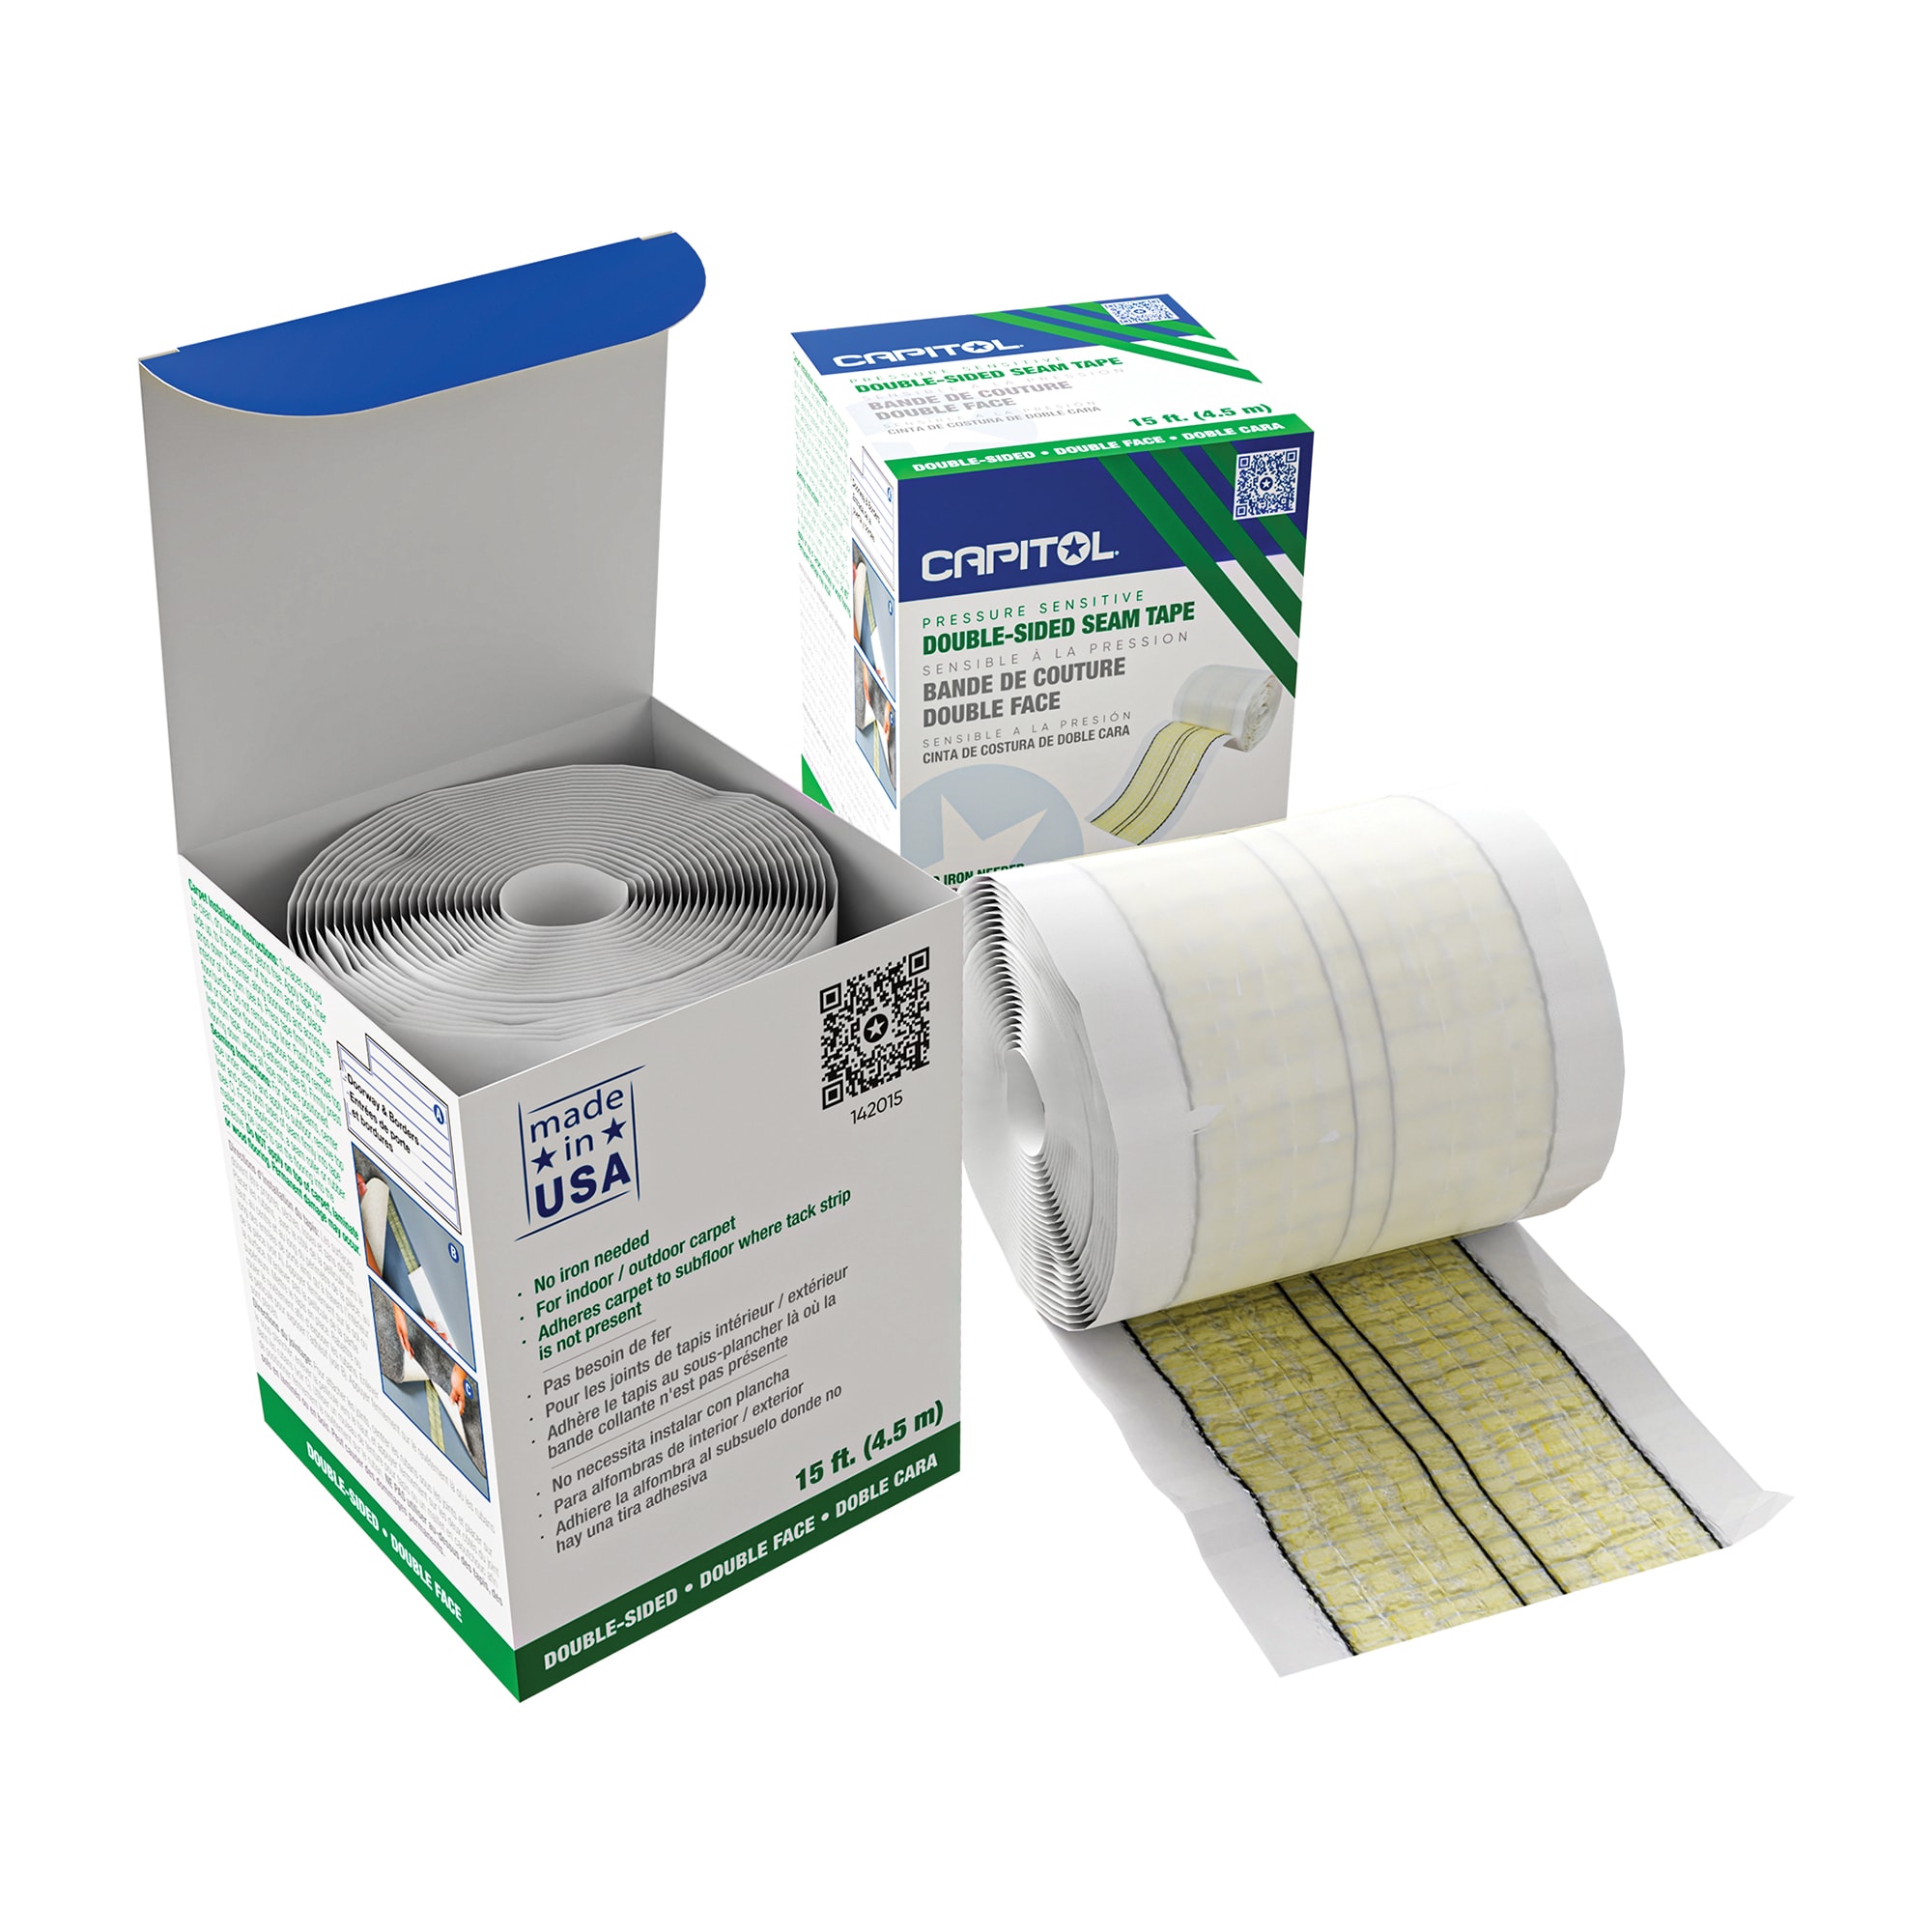 U.S. Tape Adhesive Backed Bench Tapes